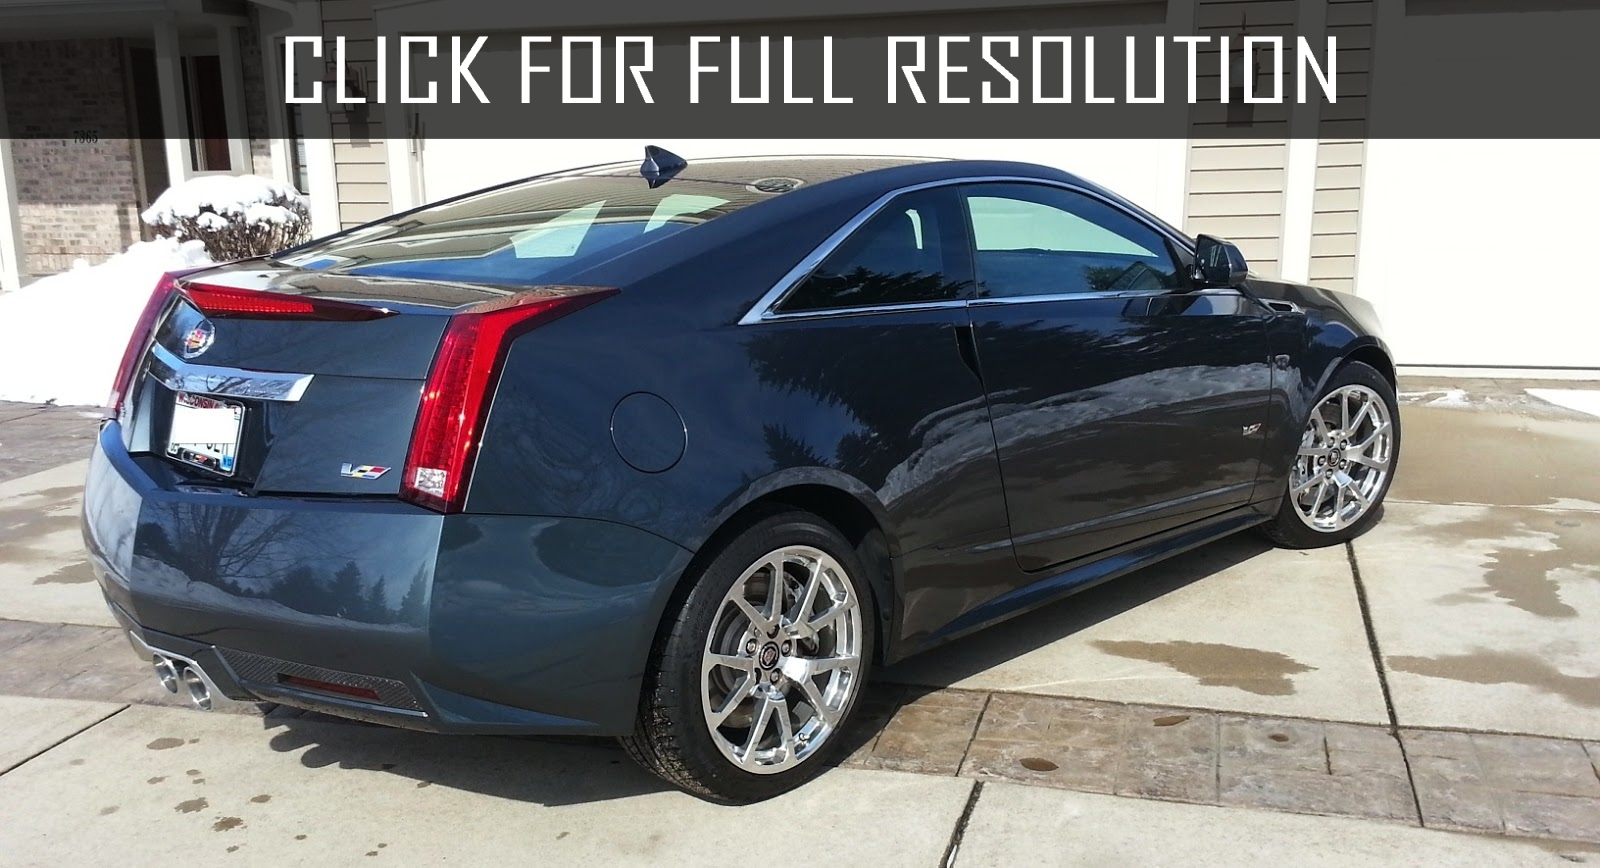 2007 Cadillac Cts Coupe